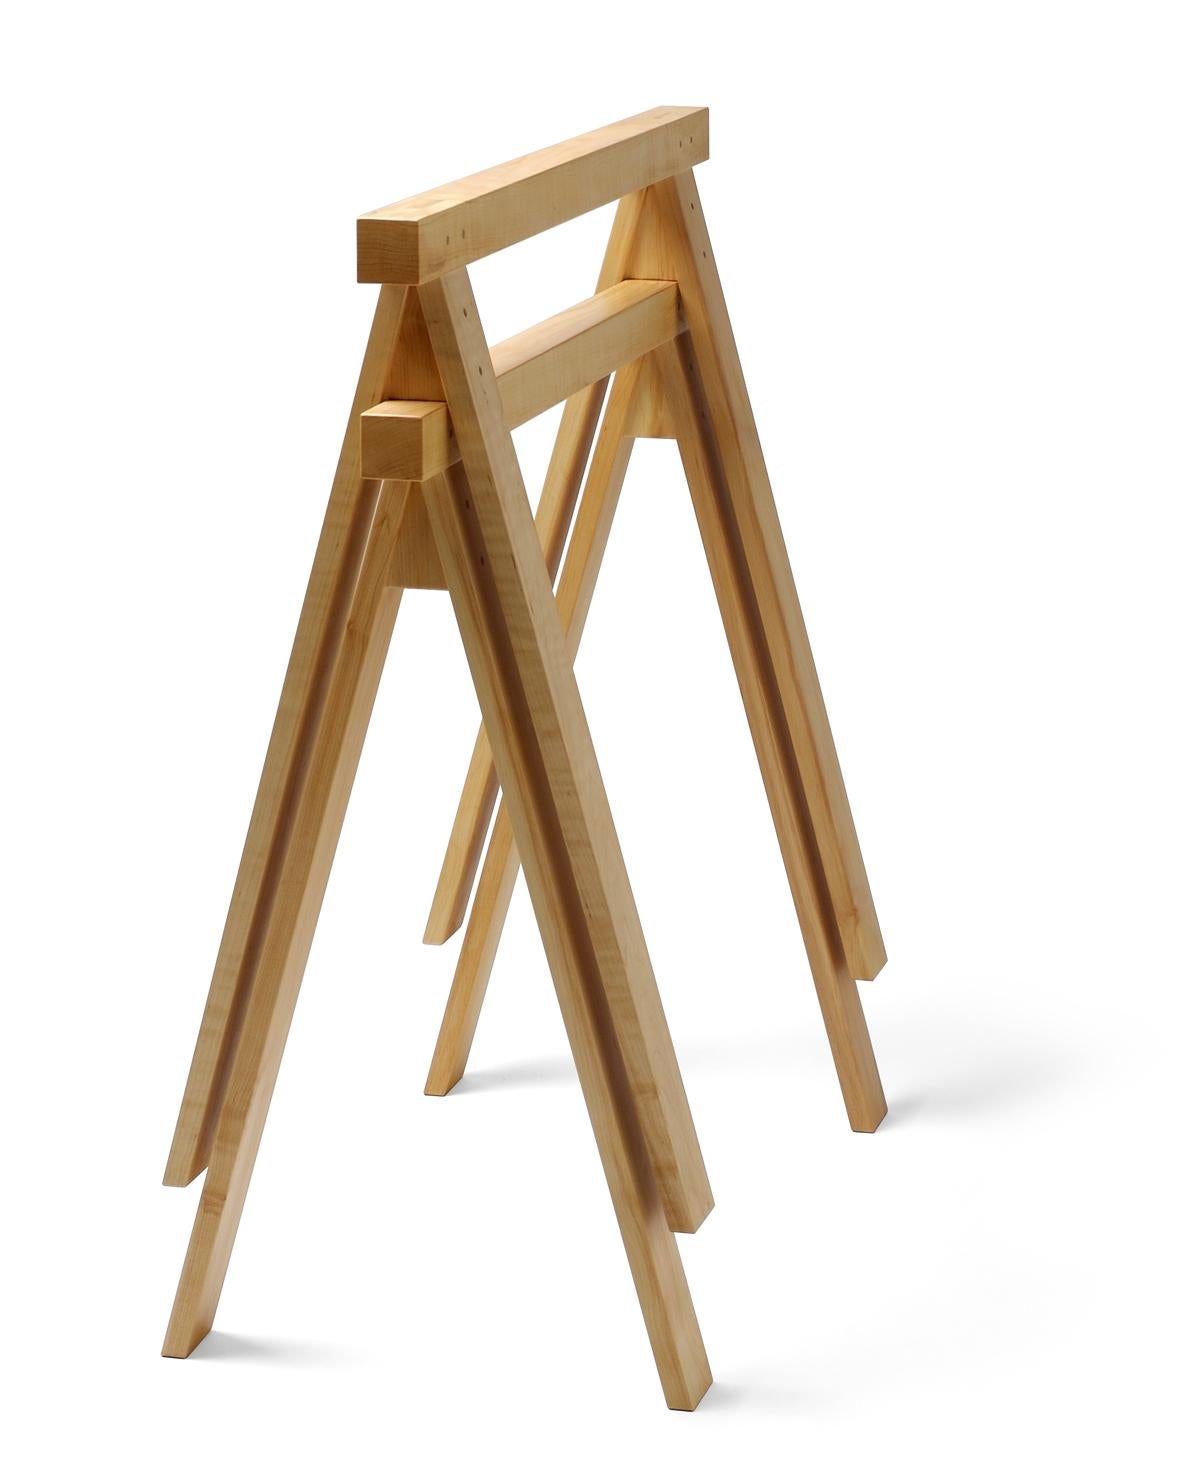 These durable trestle legs are in daily use at the Nikari studio workshop, carrying heavy loads of wooden planks. They are practical and stack well – together with the architecture table tops they create a timeless solid wooden